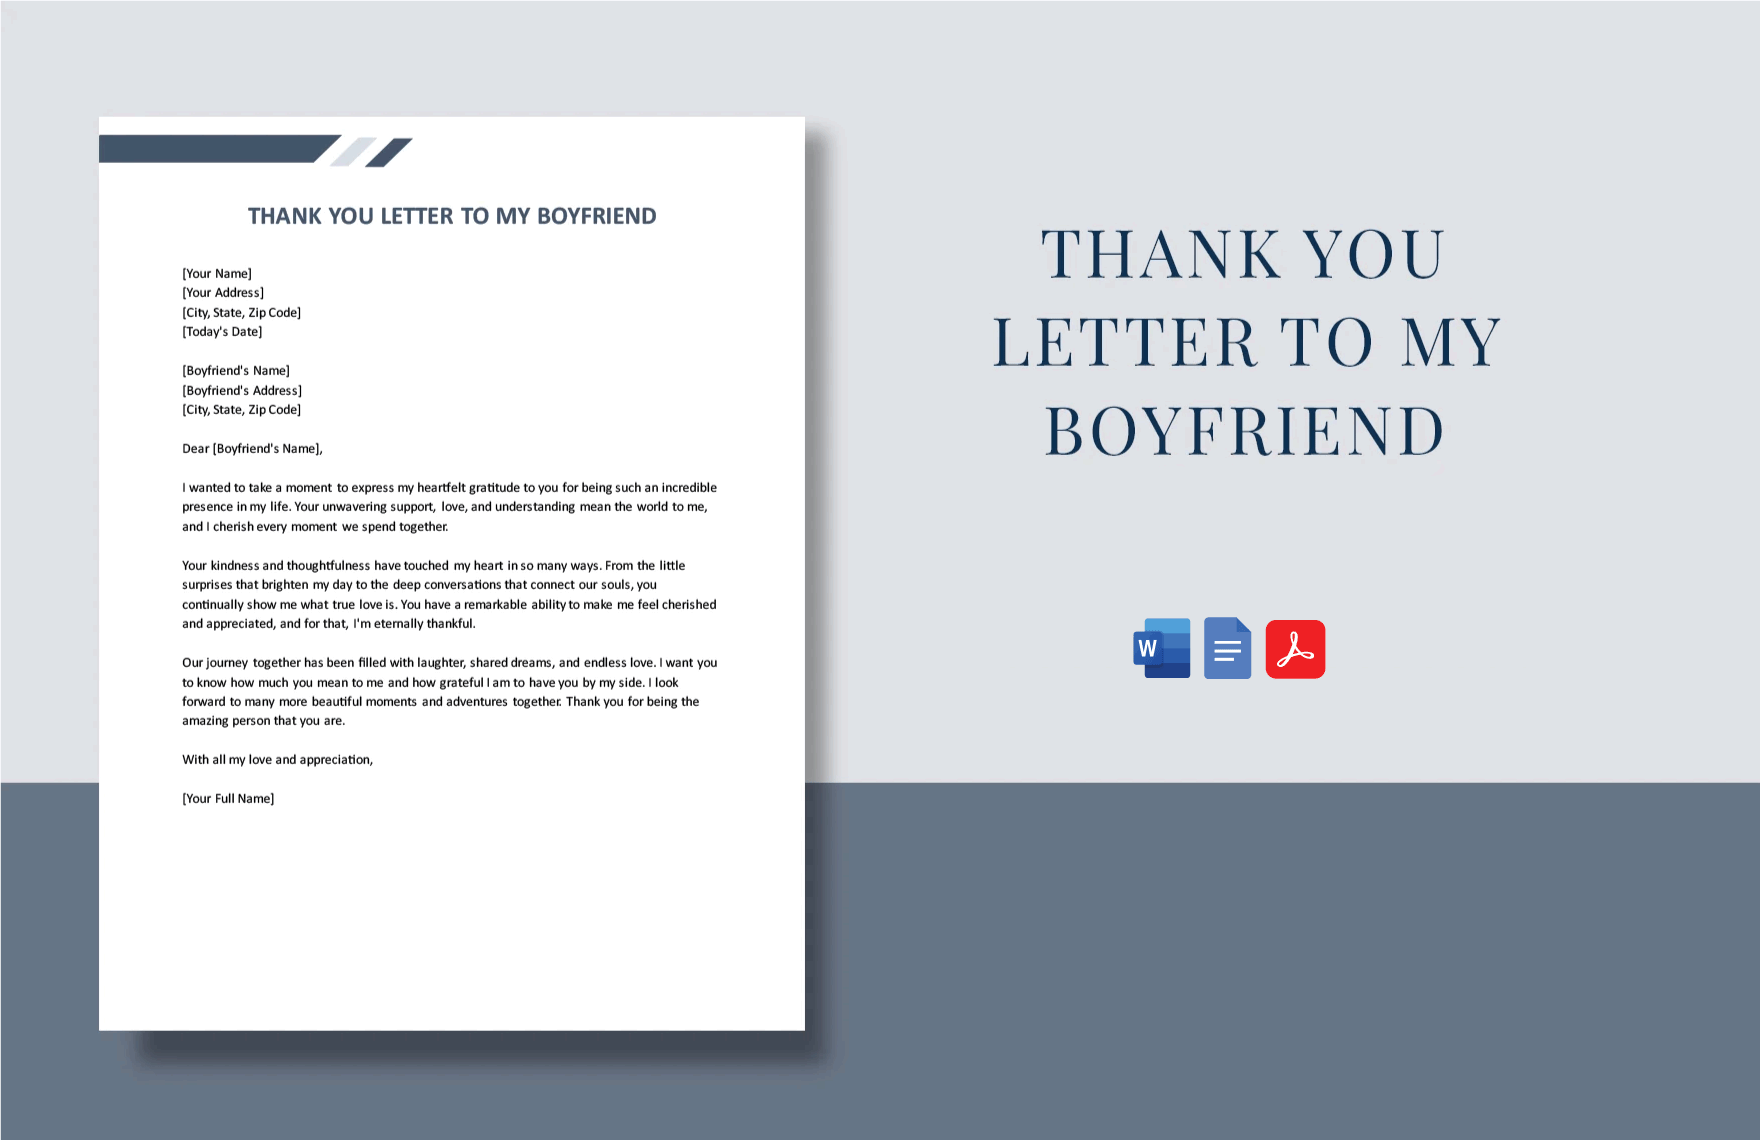 Thank-You Letter To My Boyfriend in Word, Google Docs, PDF